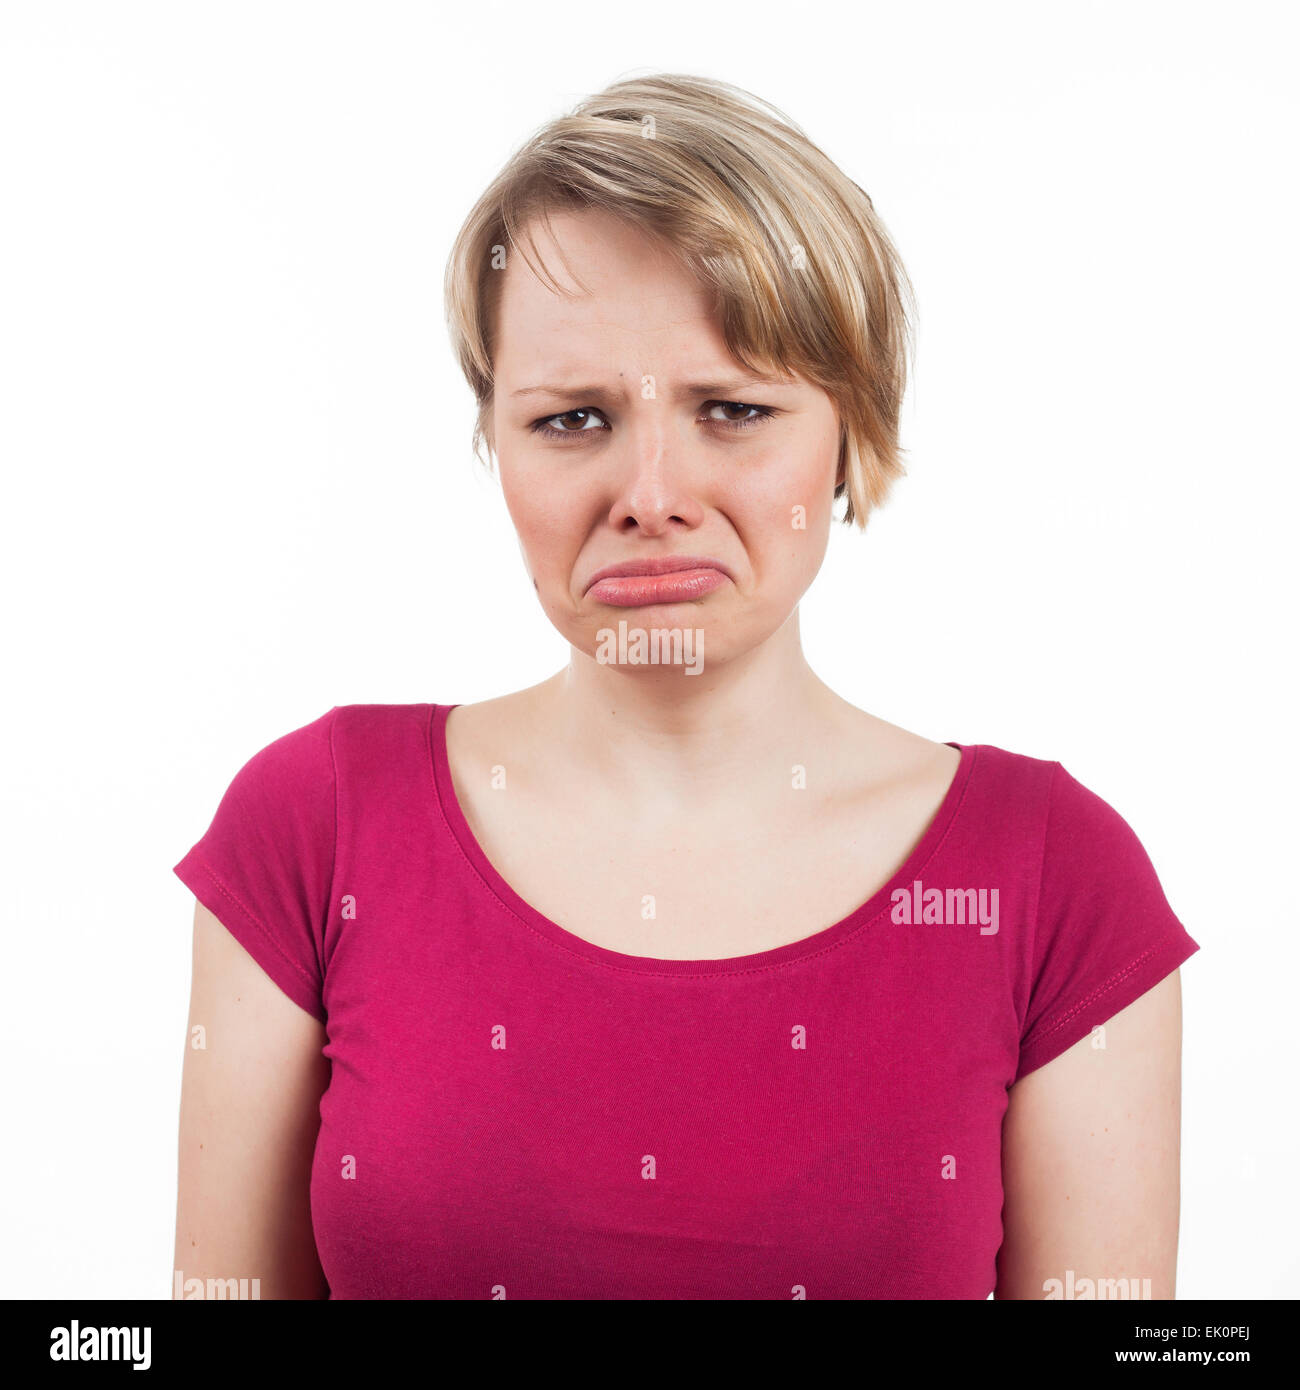 Young woman with an unhappy expression, isolated on white Stock Photo